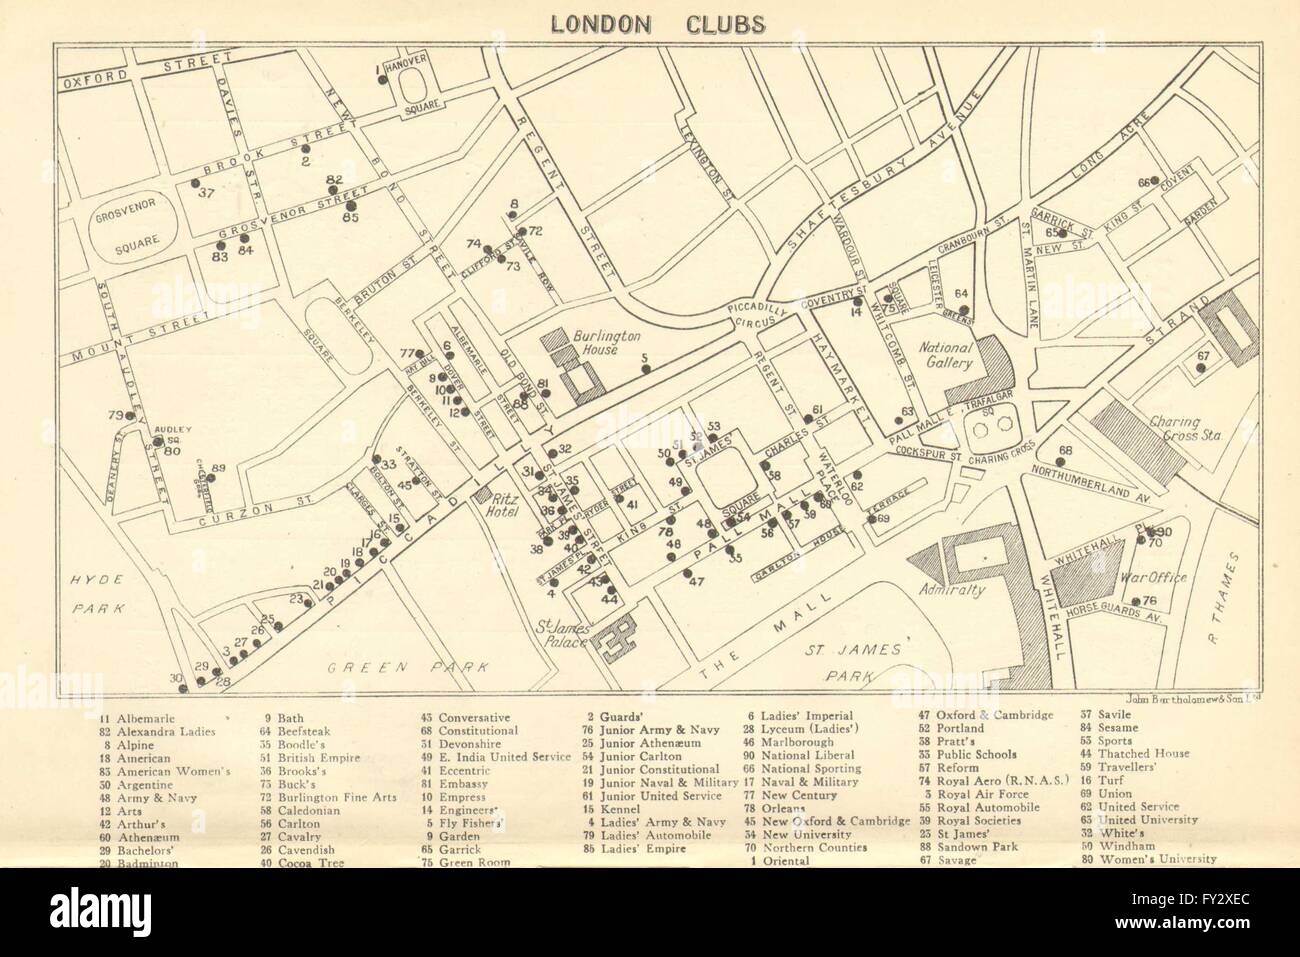 LONDON GENTLEMENS CLUBS: St James's Mayfair Piccadilly Whitehall, 1930 old map Stock Photo